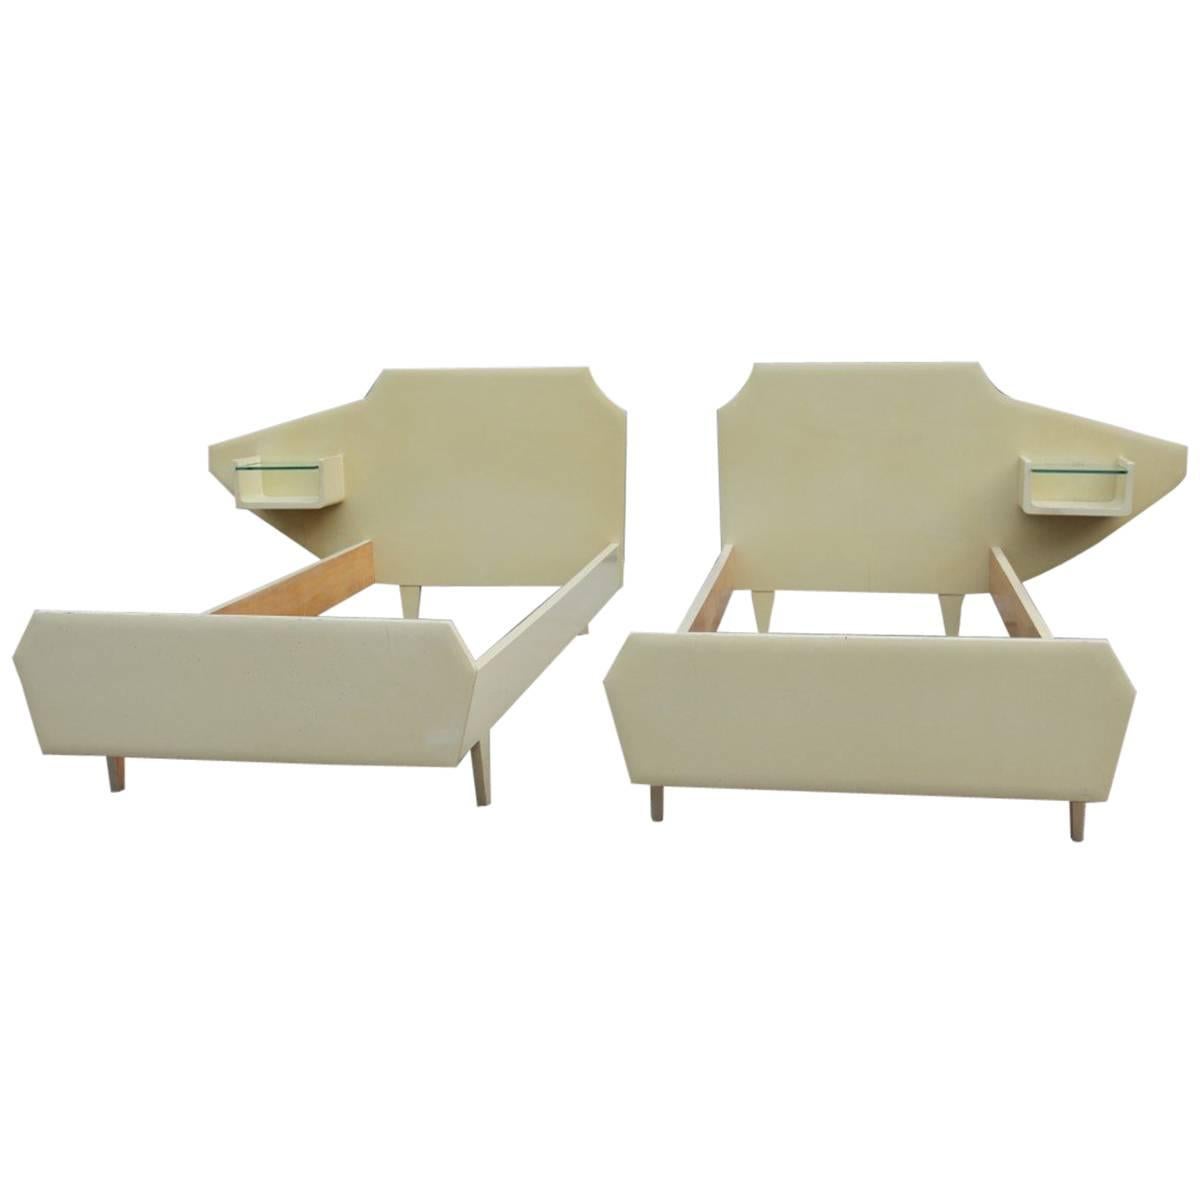 Pair of Italian Single Beds Design Dassi Wood Lacquered Mid century Modern